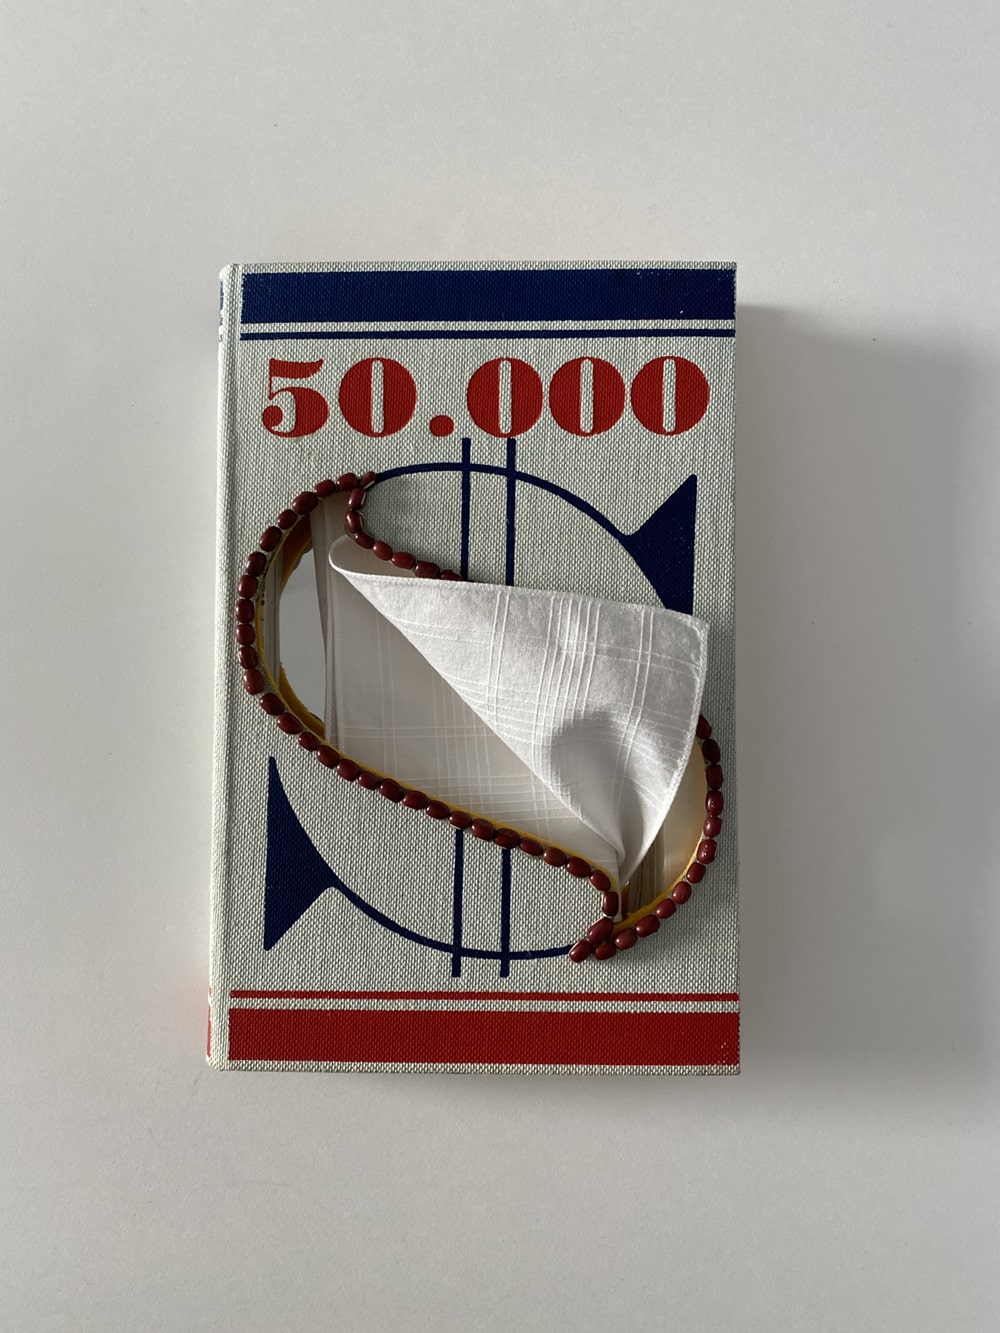 tissue book project 50000 1